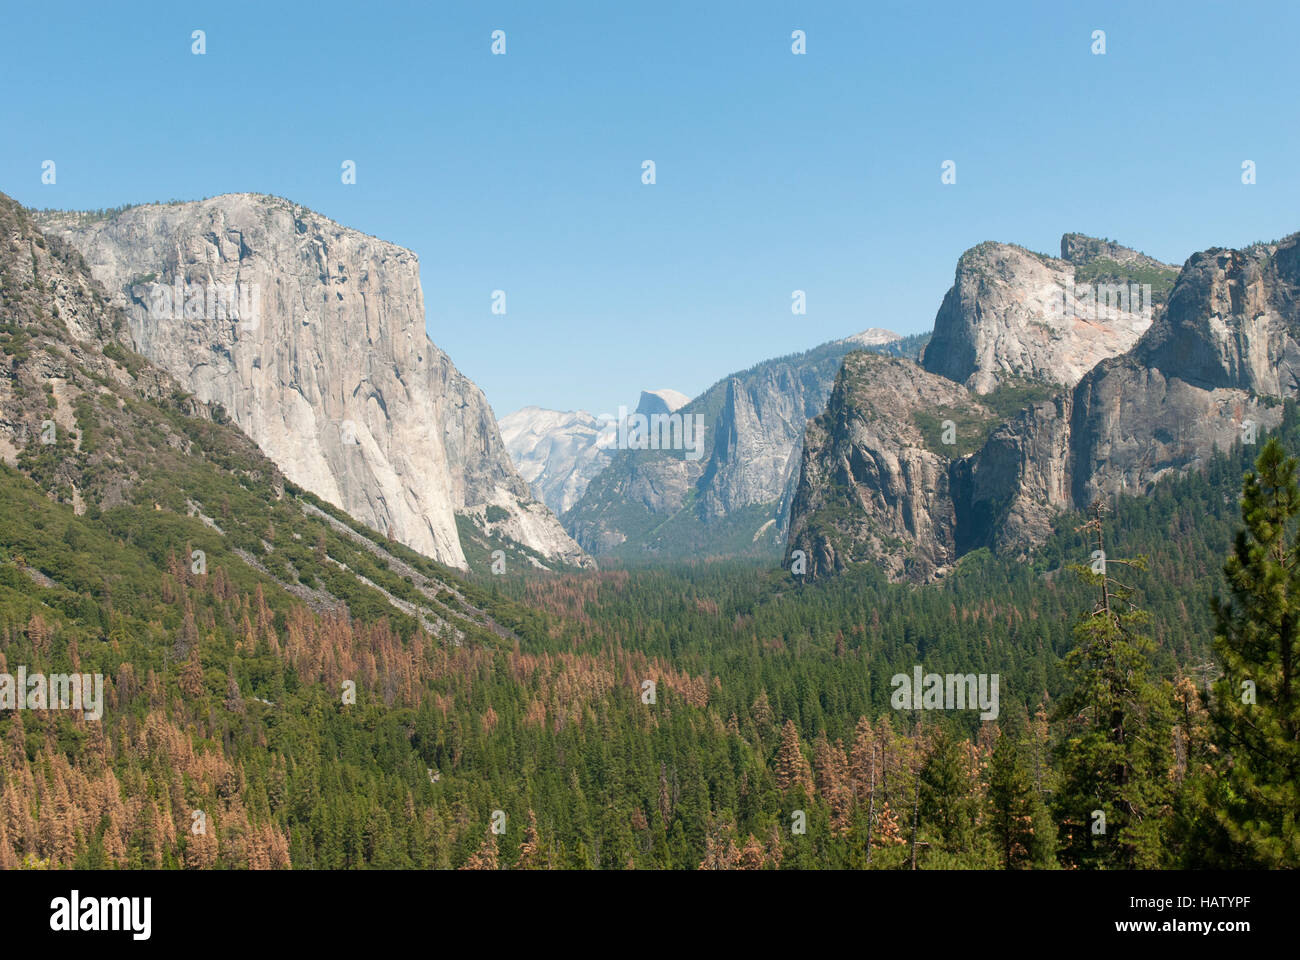 A view down the Yosemite Valley shows pine trees browned by drought and bark beetle damage. Stock Photo